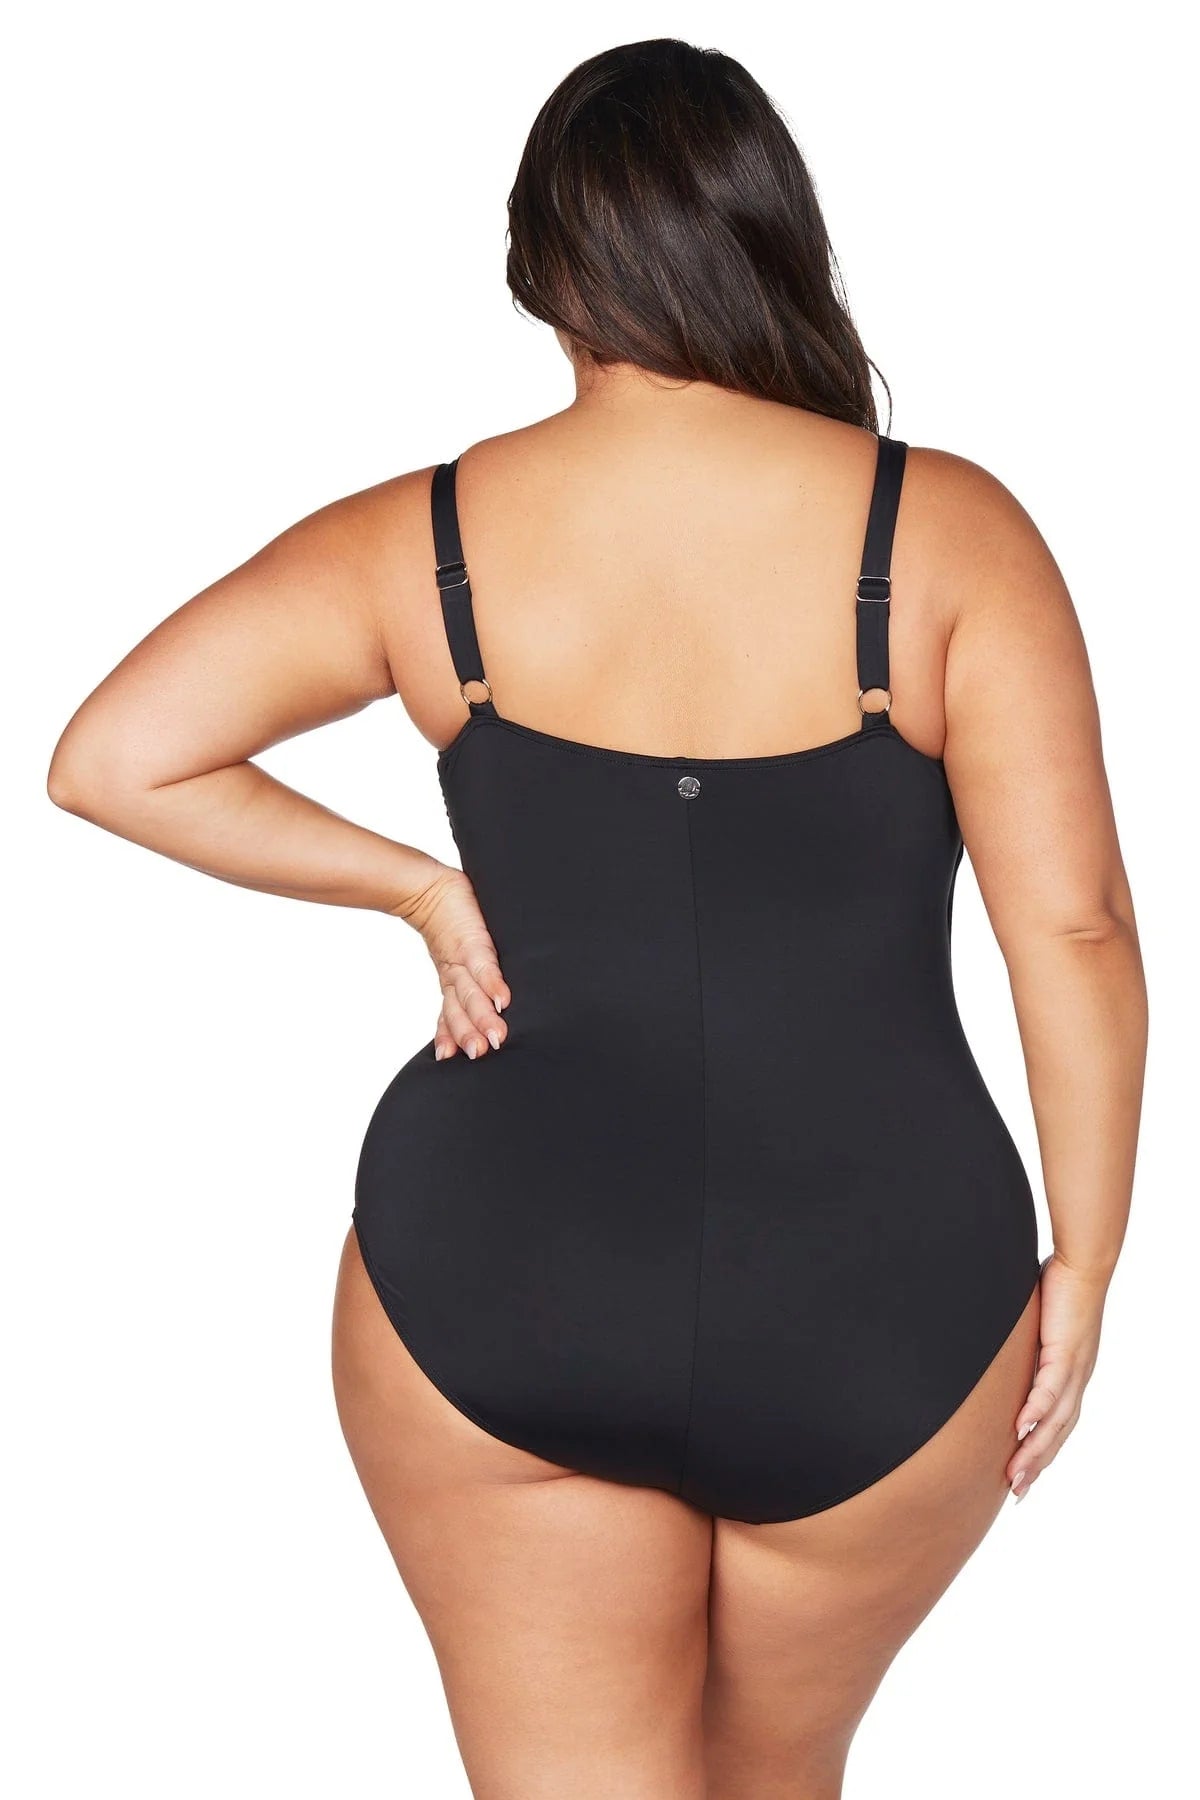 Artesands Hues Hayes Underwire One Piece